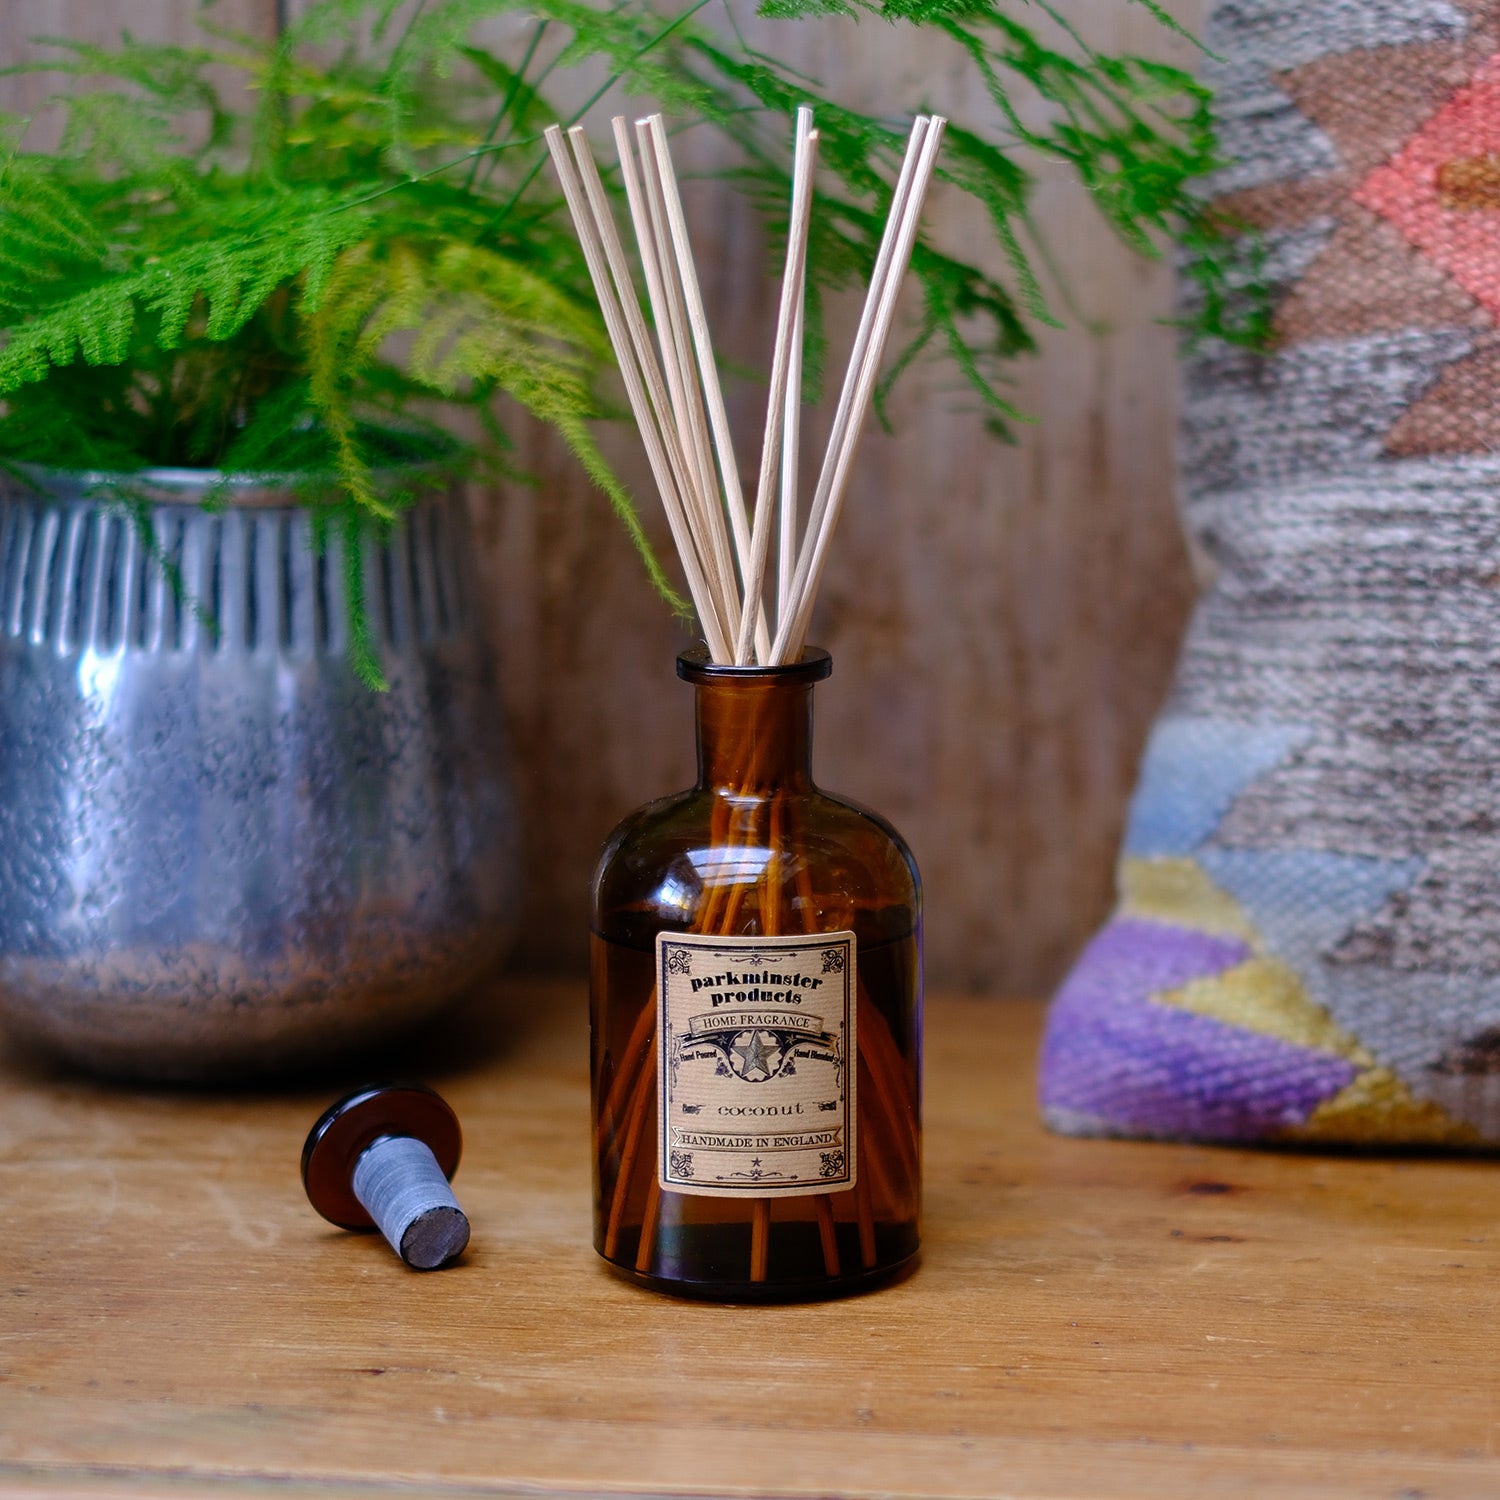 Parkminster Home Fragrance Coconut Reed Diffuser, 200ml bottle with a tropical and sweet scent, part of the Cornwall-made Apothecary Collection